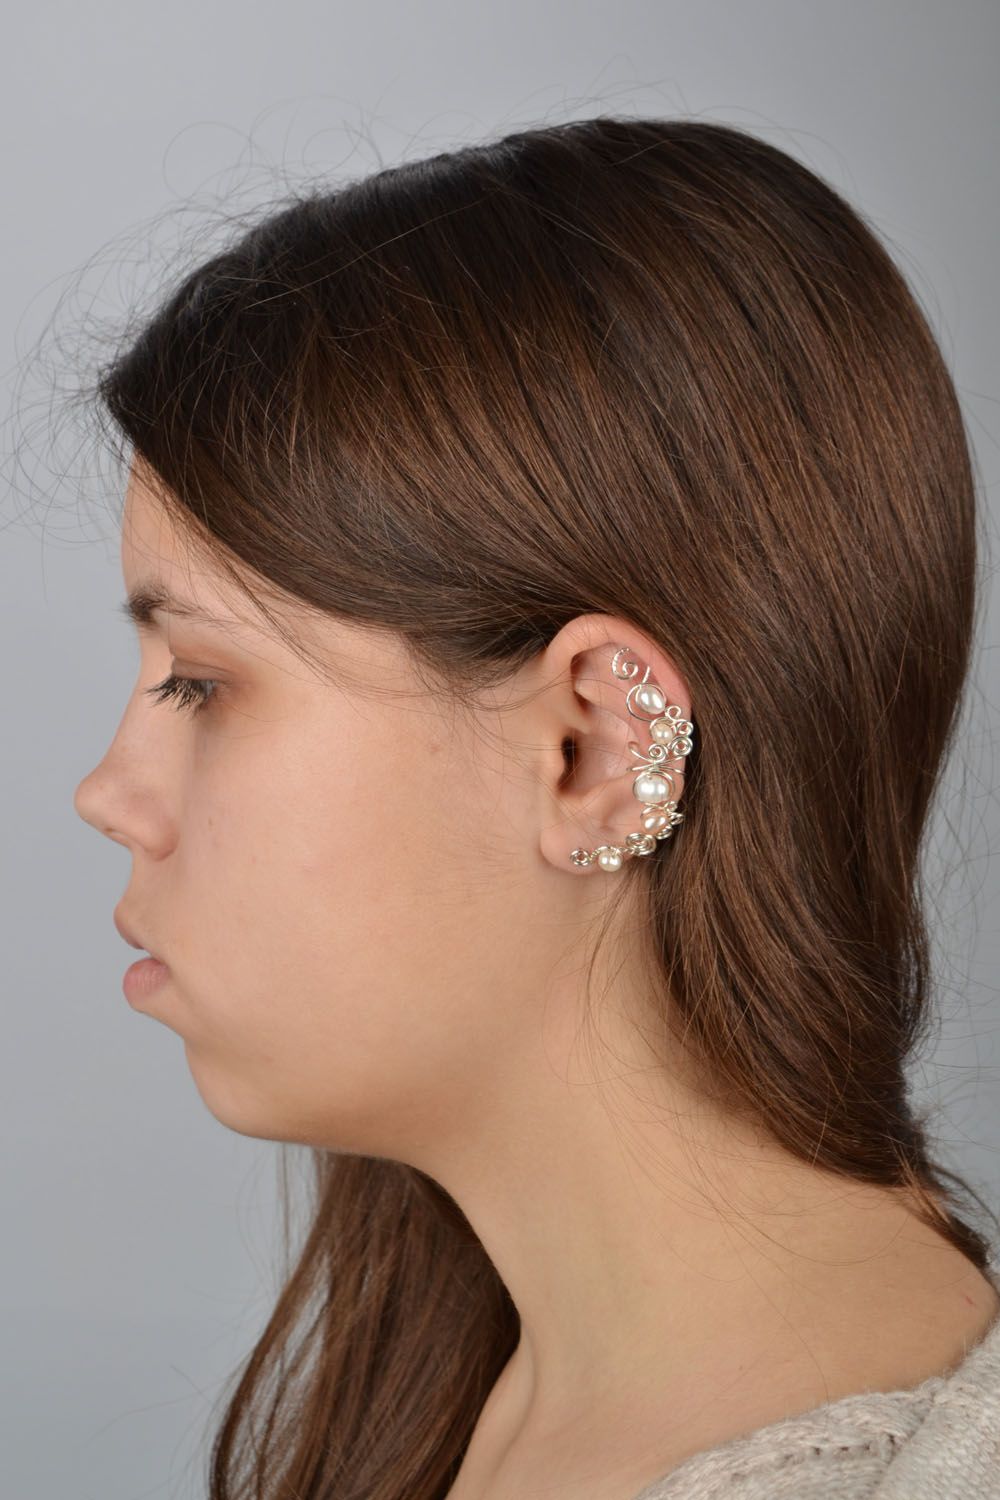 Boucle d'oreille ear cuff wire wrapping avec perles naturelles photo 1